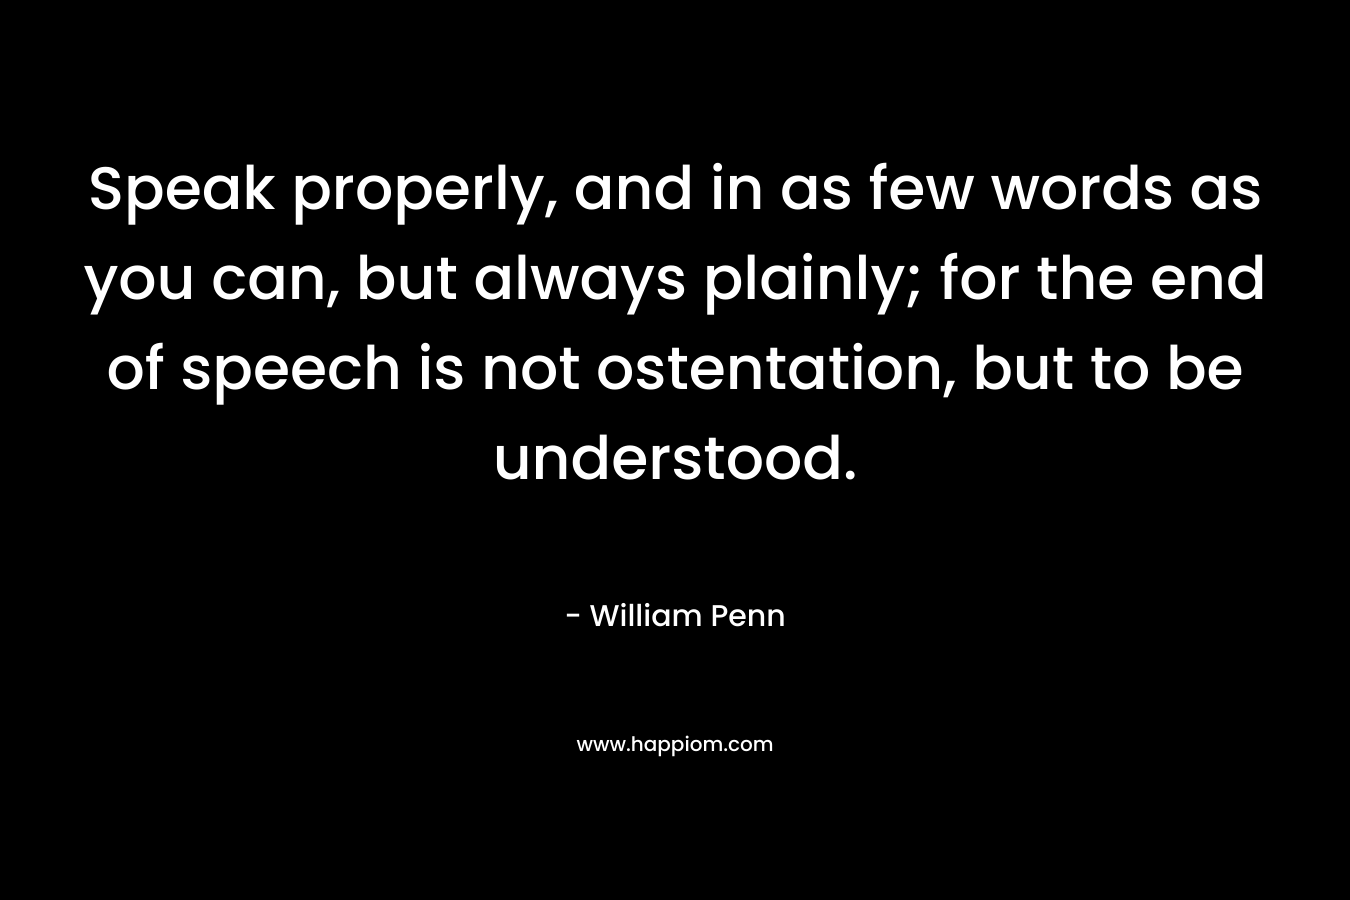 Speak properly, and in as few words as you can, but always plainly; for the end of speech is not ostentation, but to be understood.